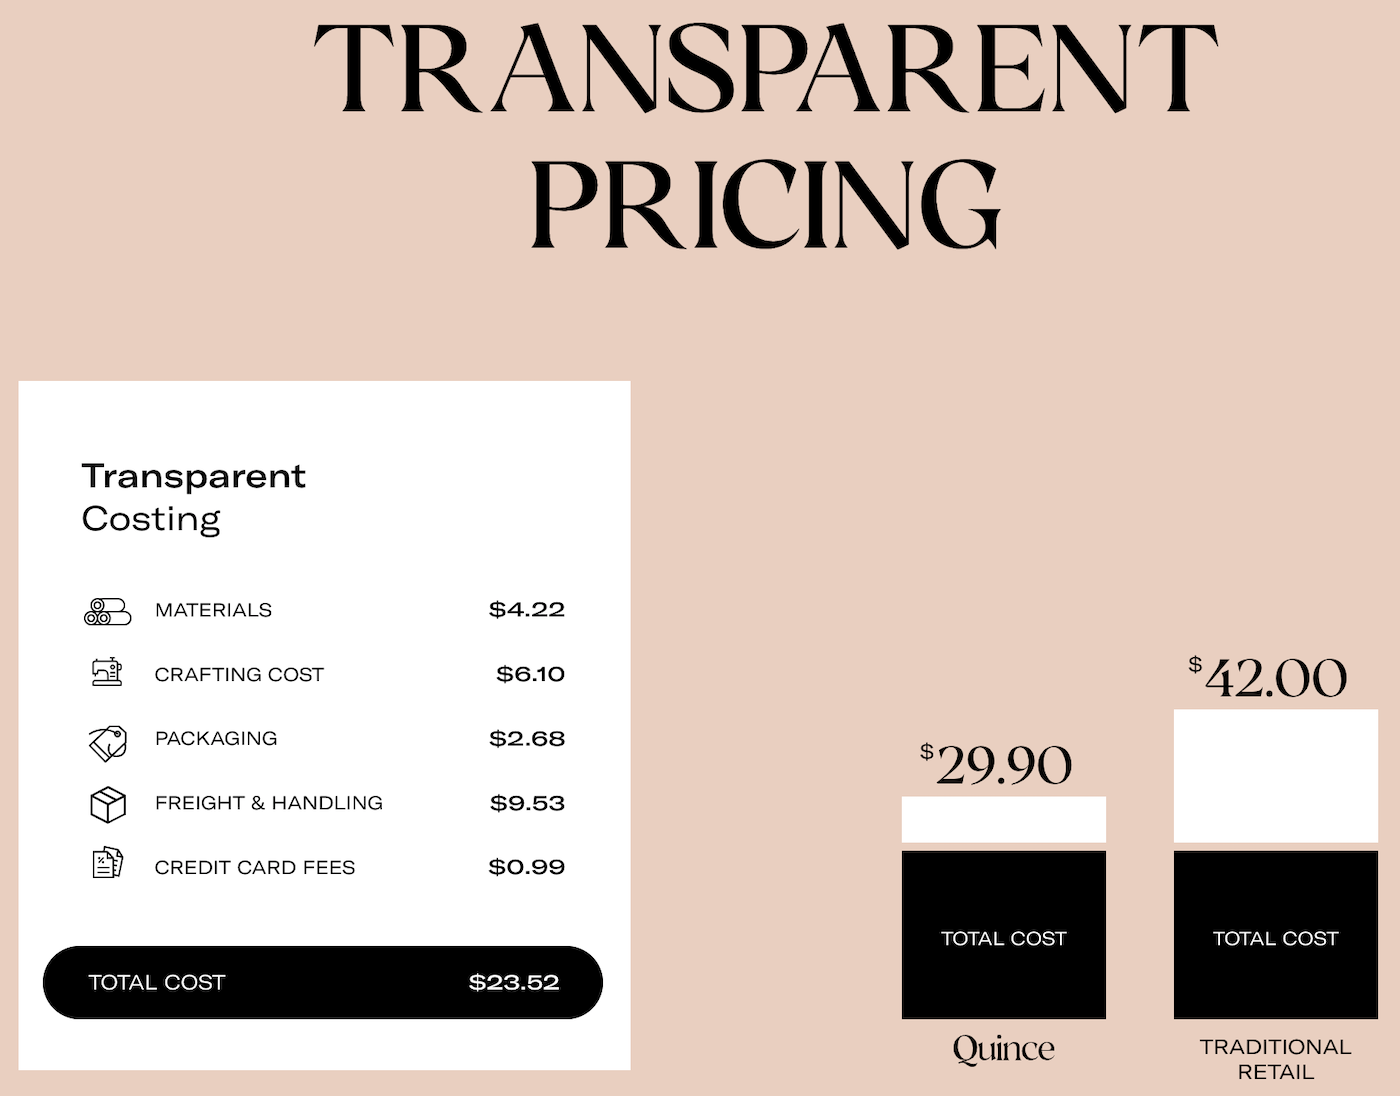 Quince Transparent pricing for the Ultra soft performance bra